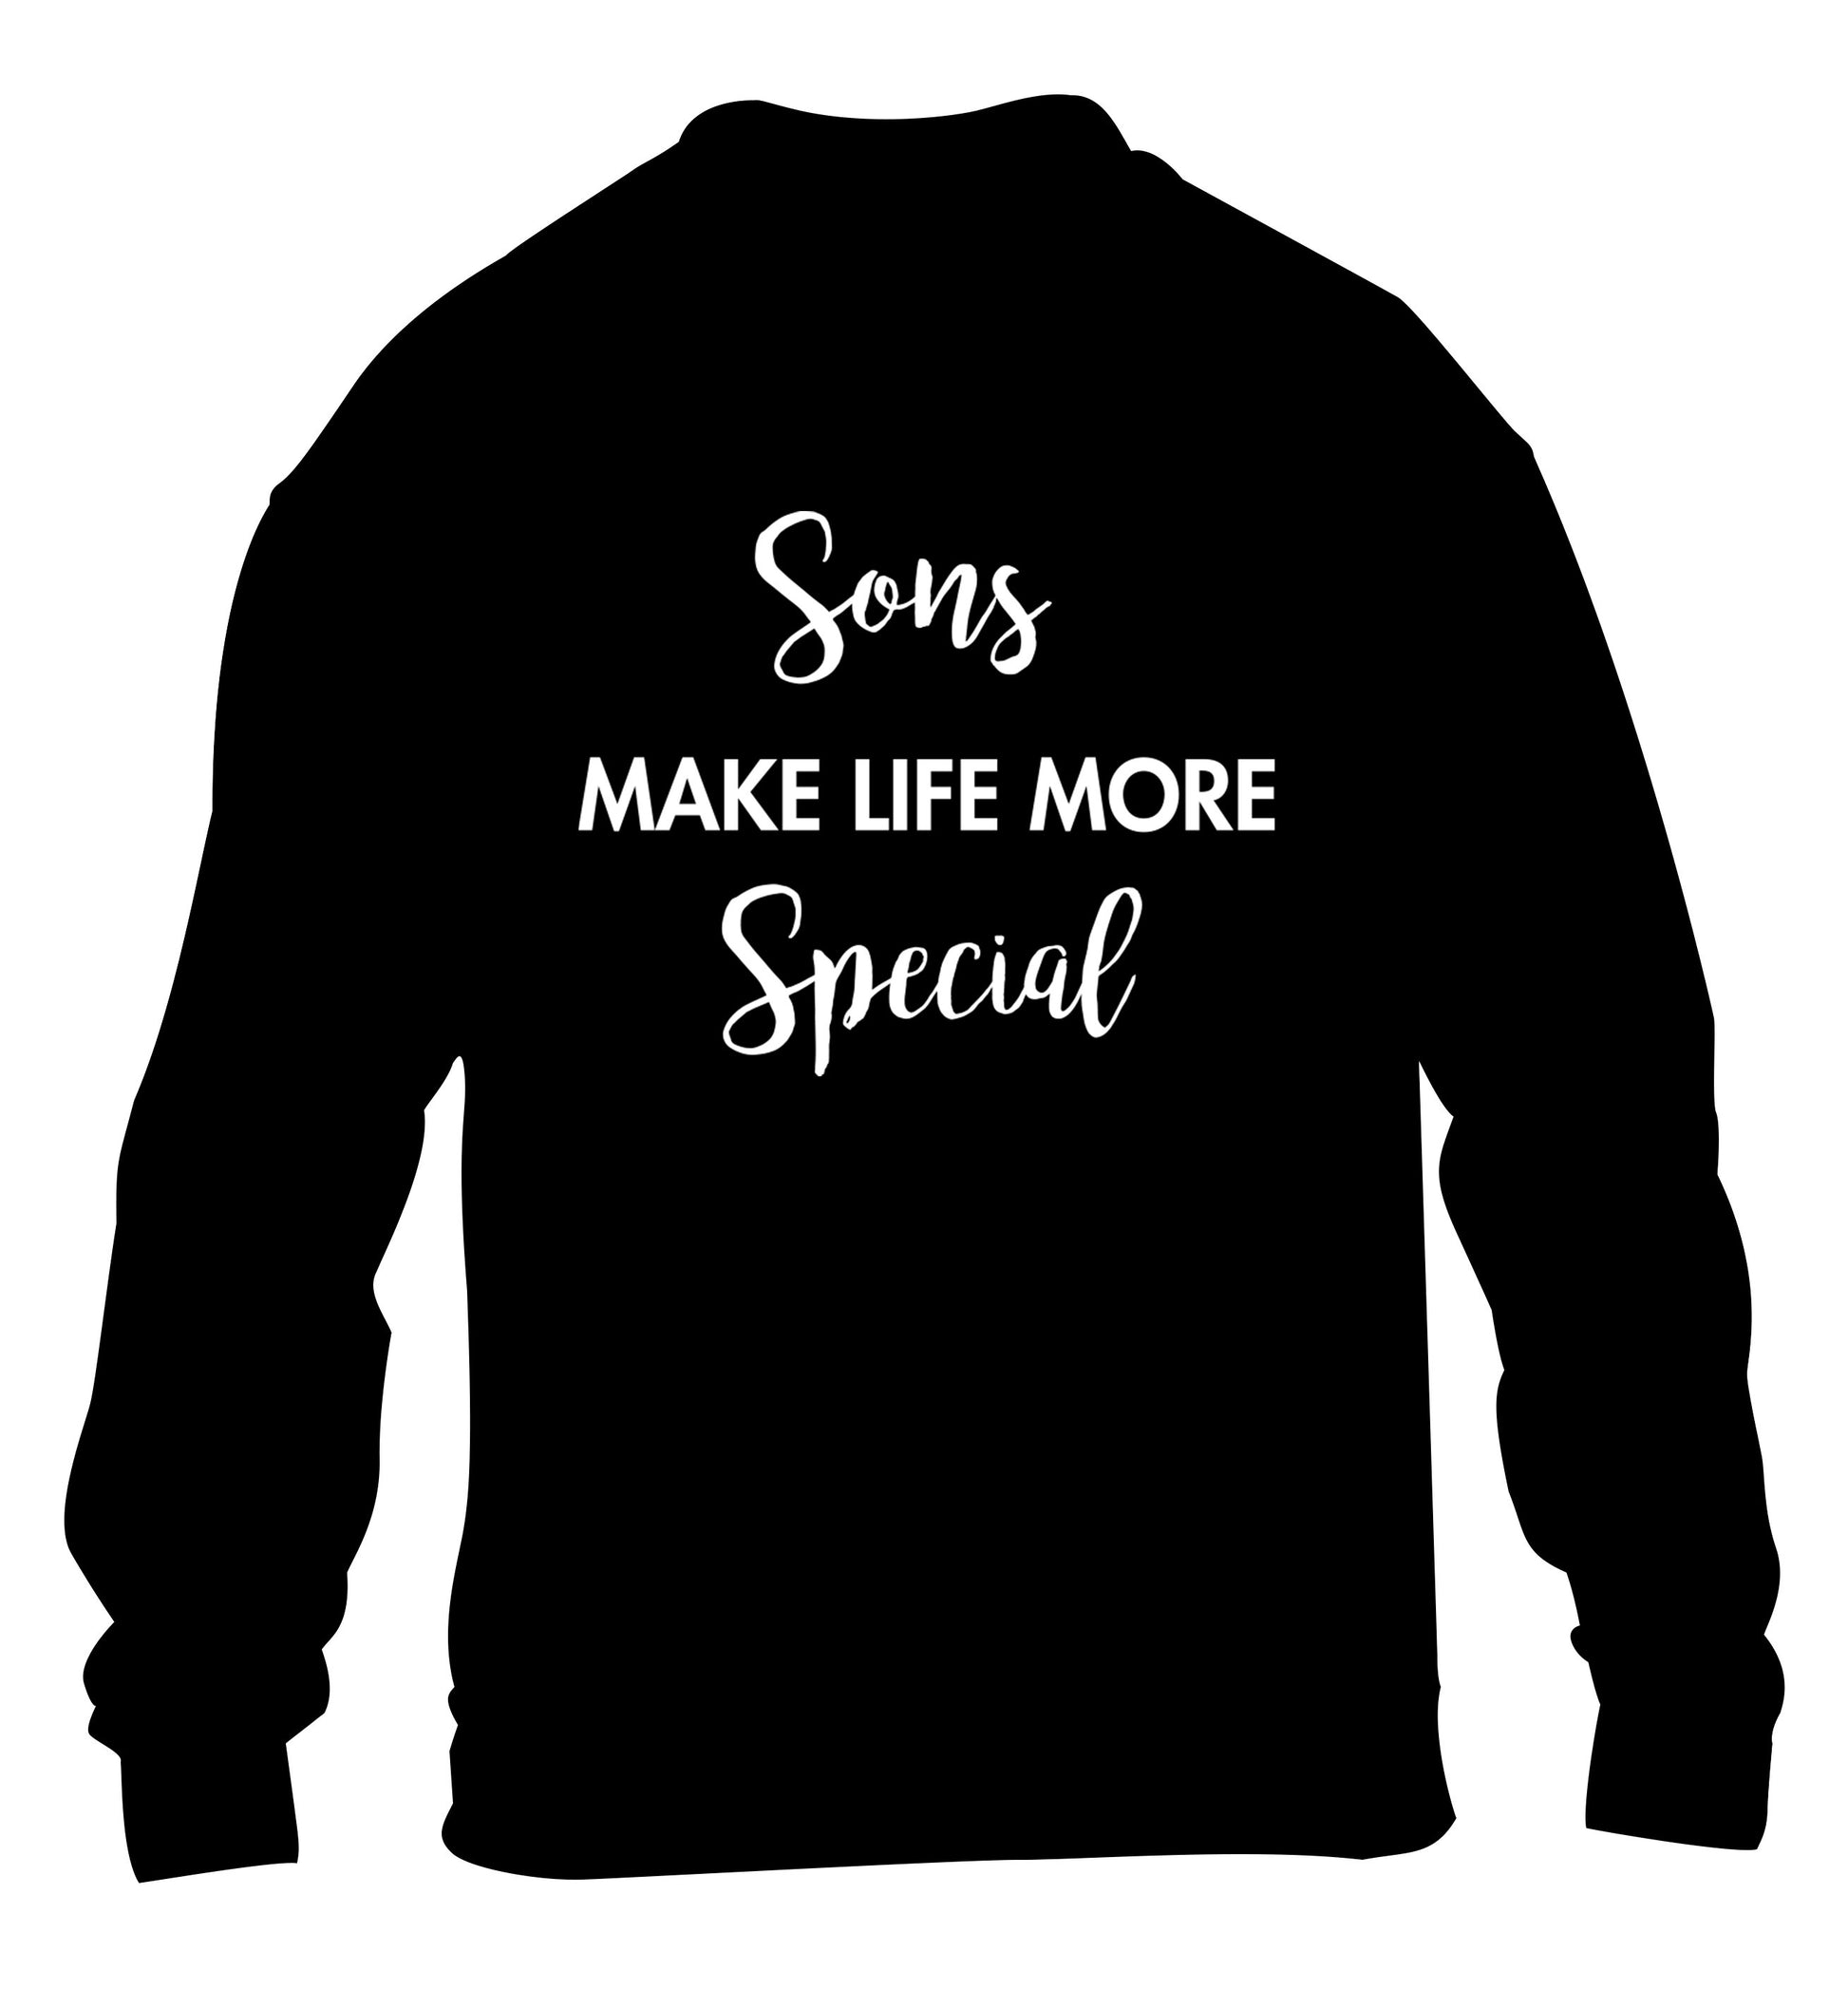 Daughters make life more special children's black sweater 12-14 Years